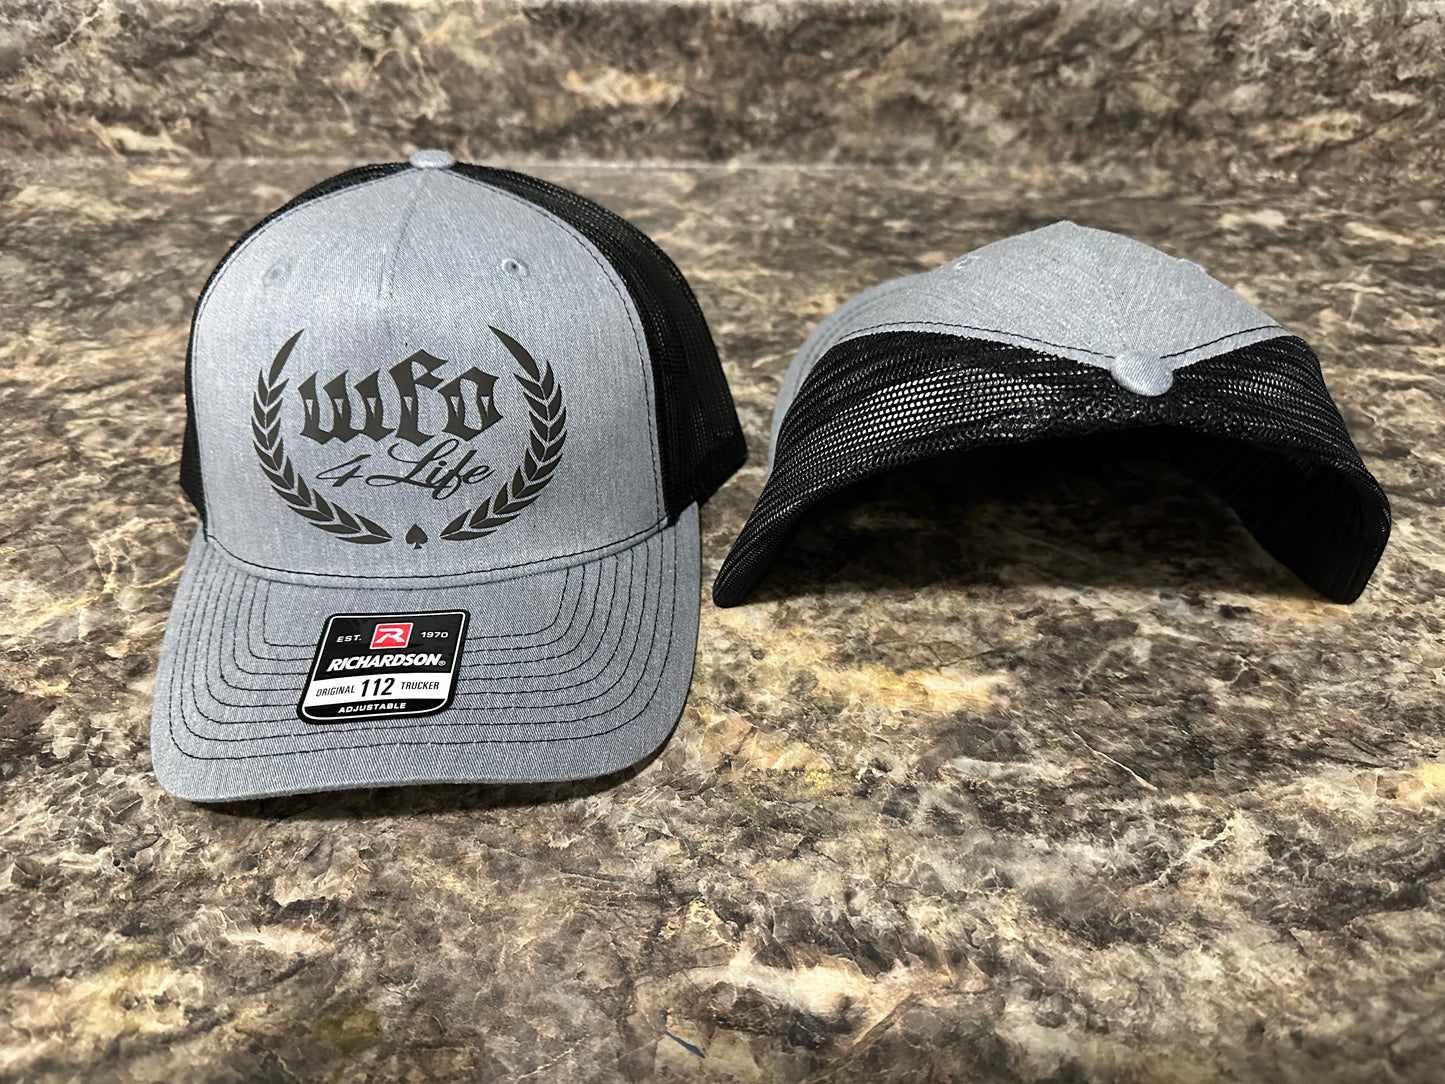 WFO 4 LIFE ™ - "Classic Trademark" Curved Bill / Mesh Snapback Hat - 2 Color Options